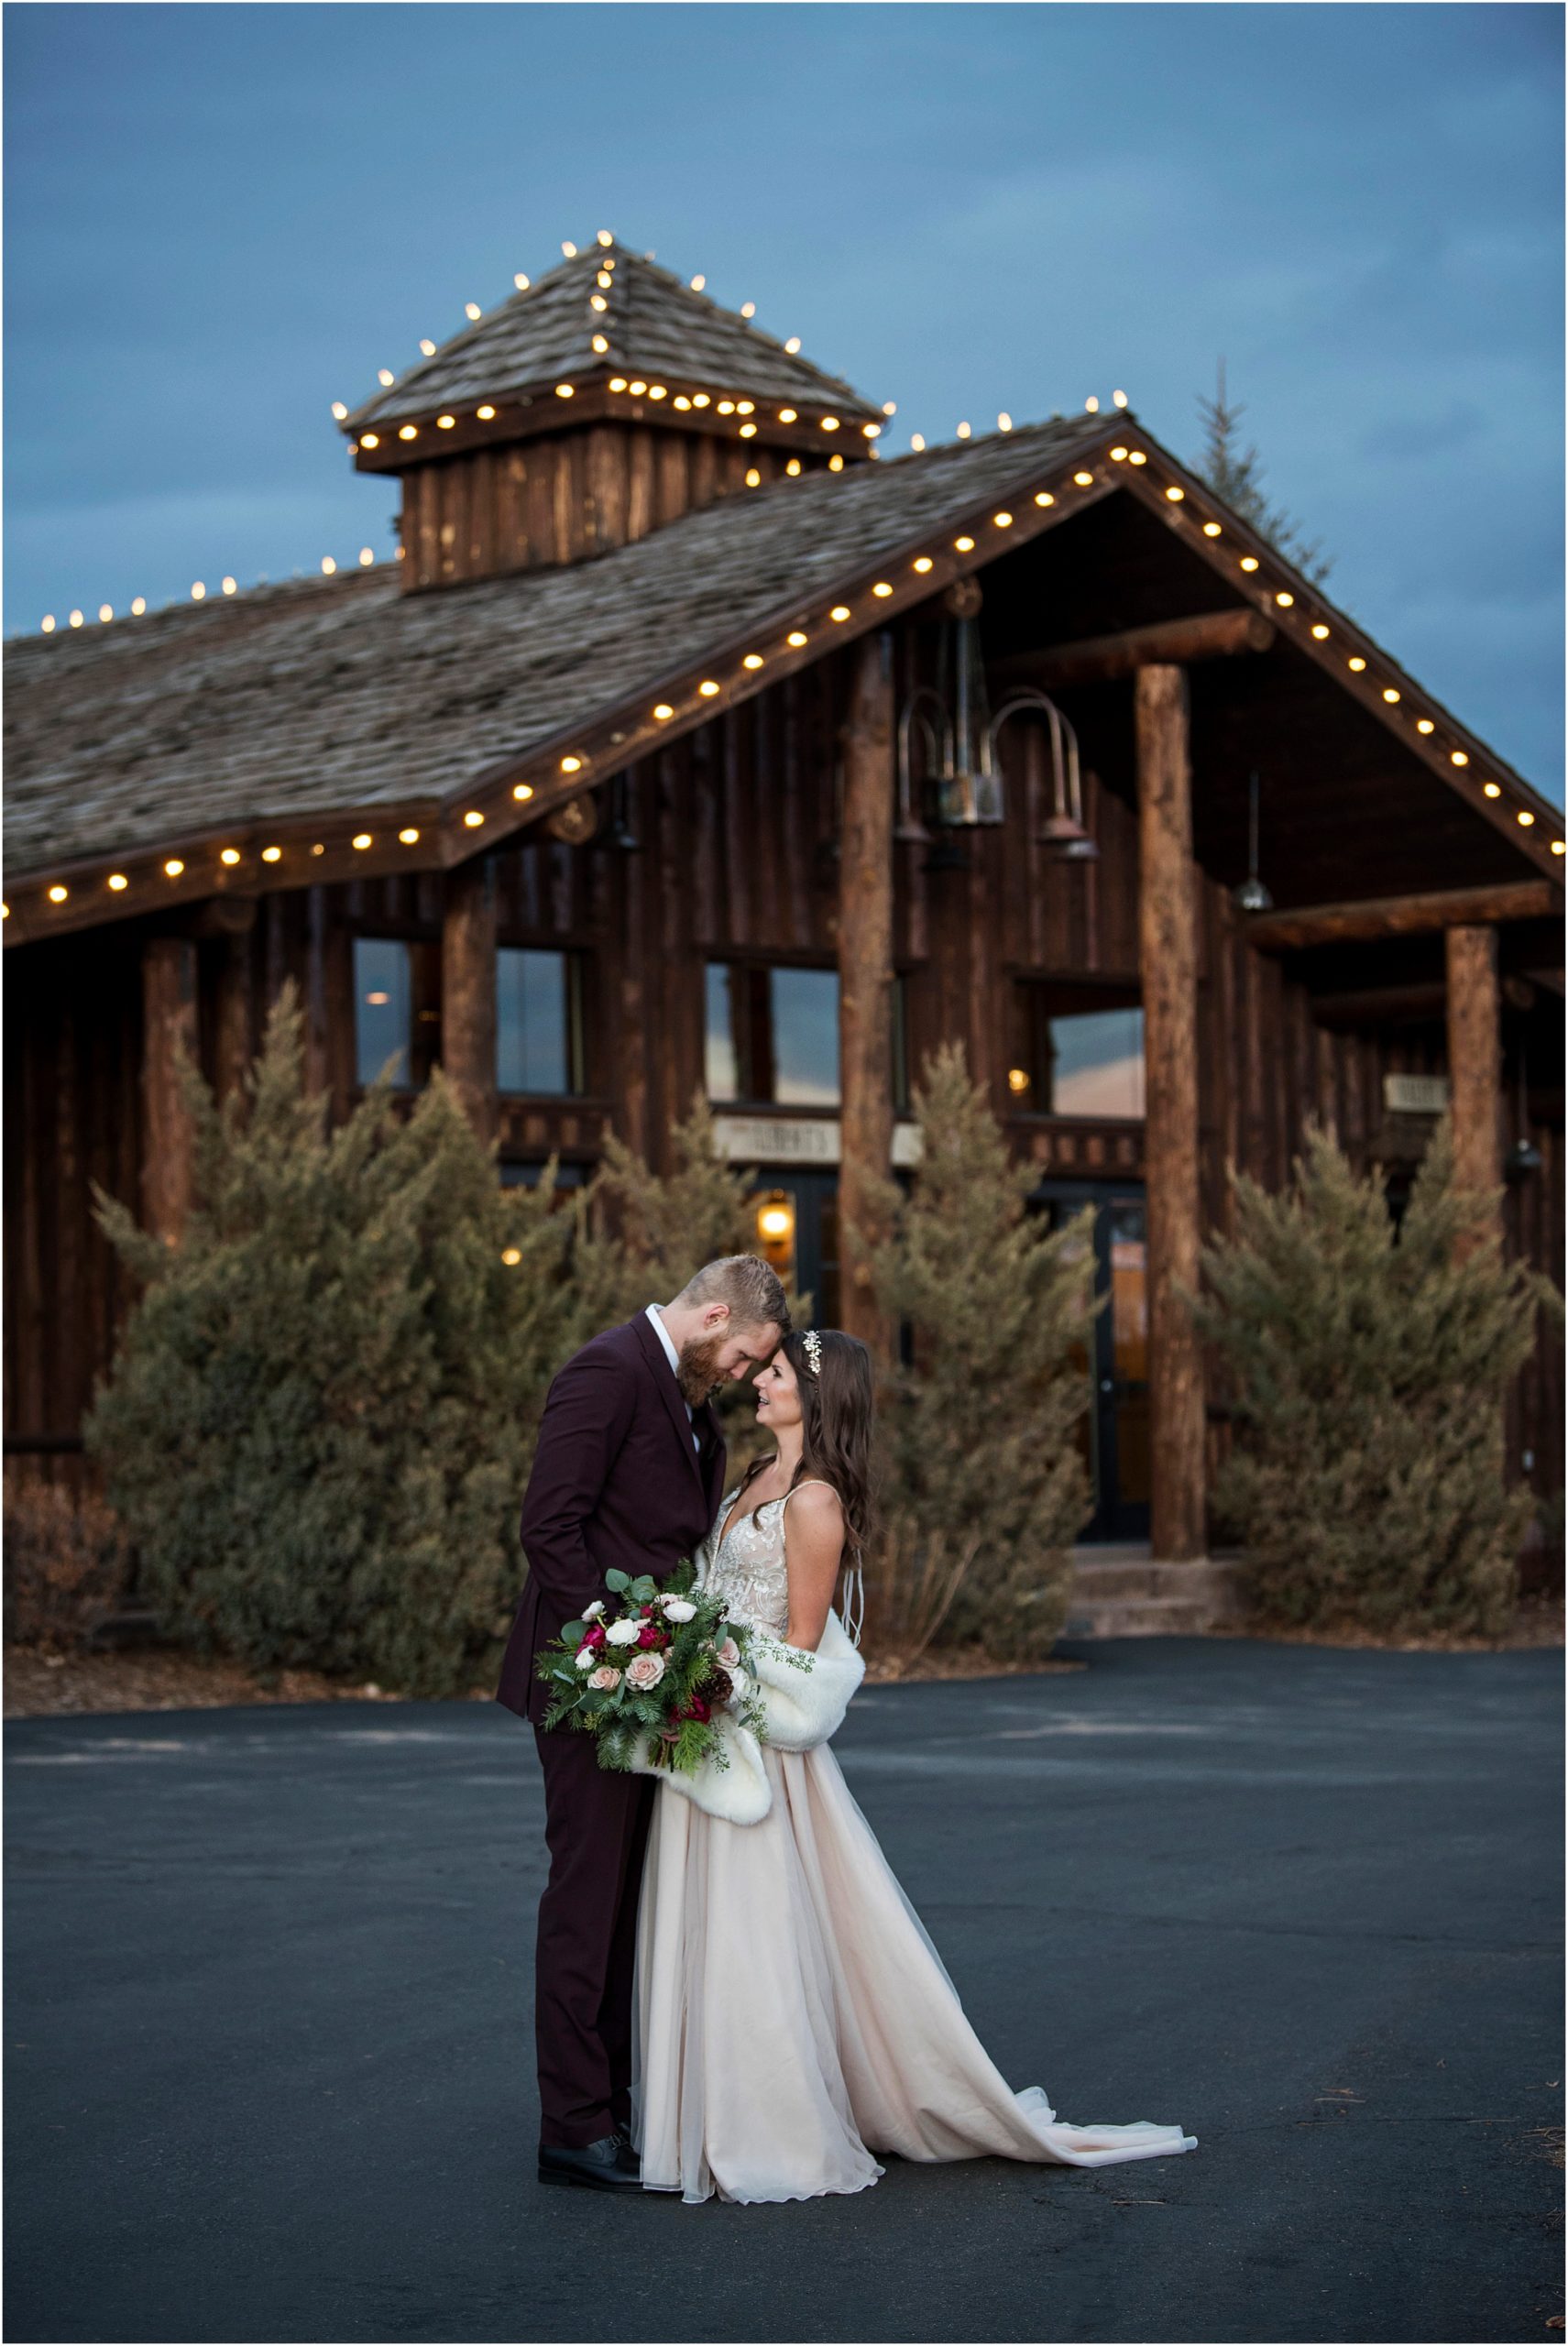 Bride and groom embrace in front of Alberts lodge at dusk at their December wedding.